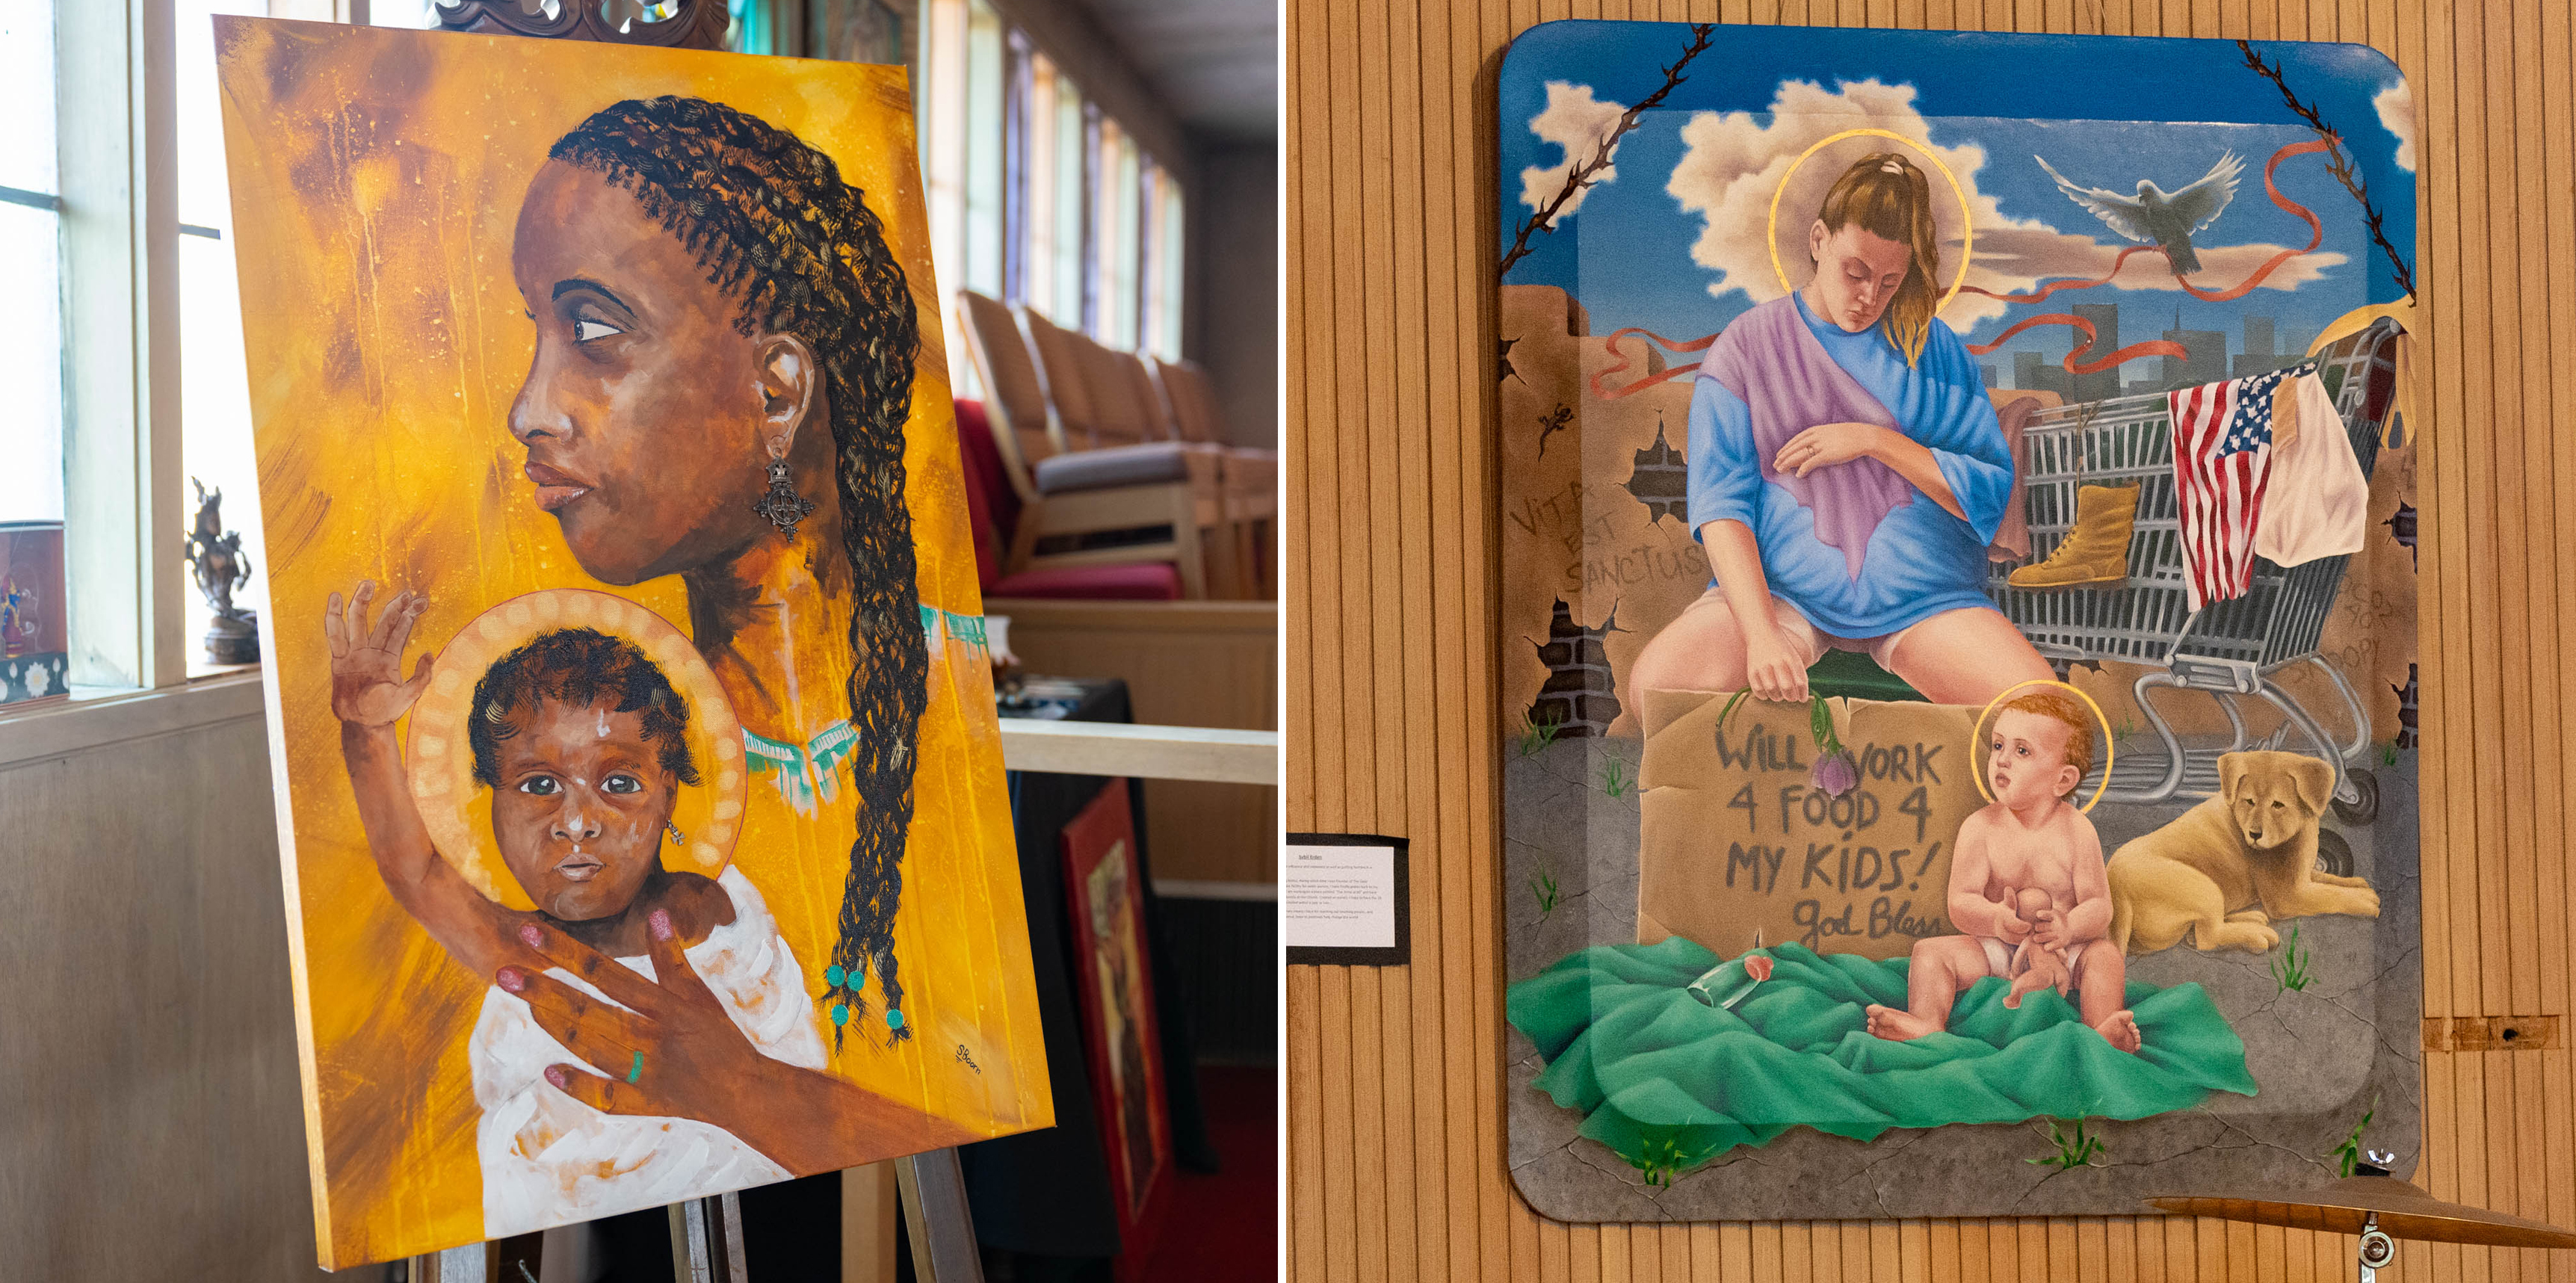 Two side by side photos of artwork depicting women with children.